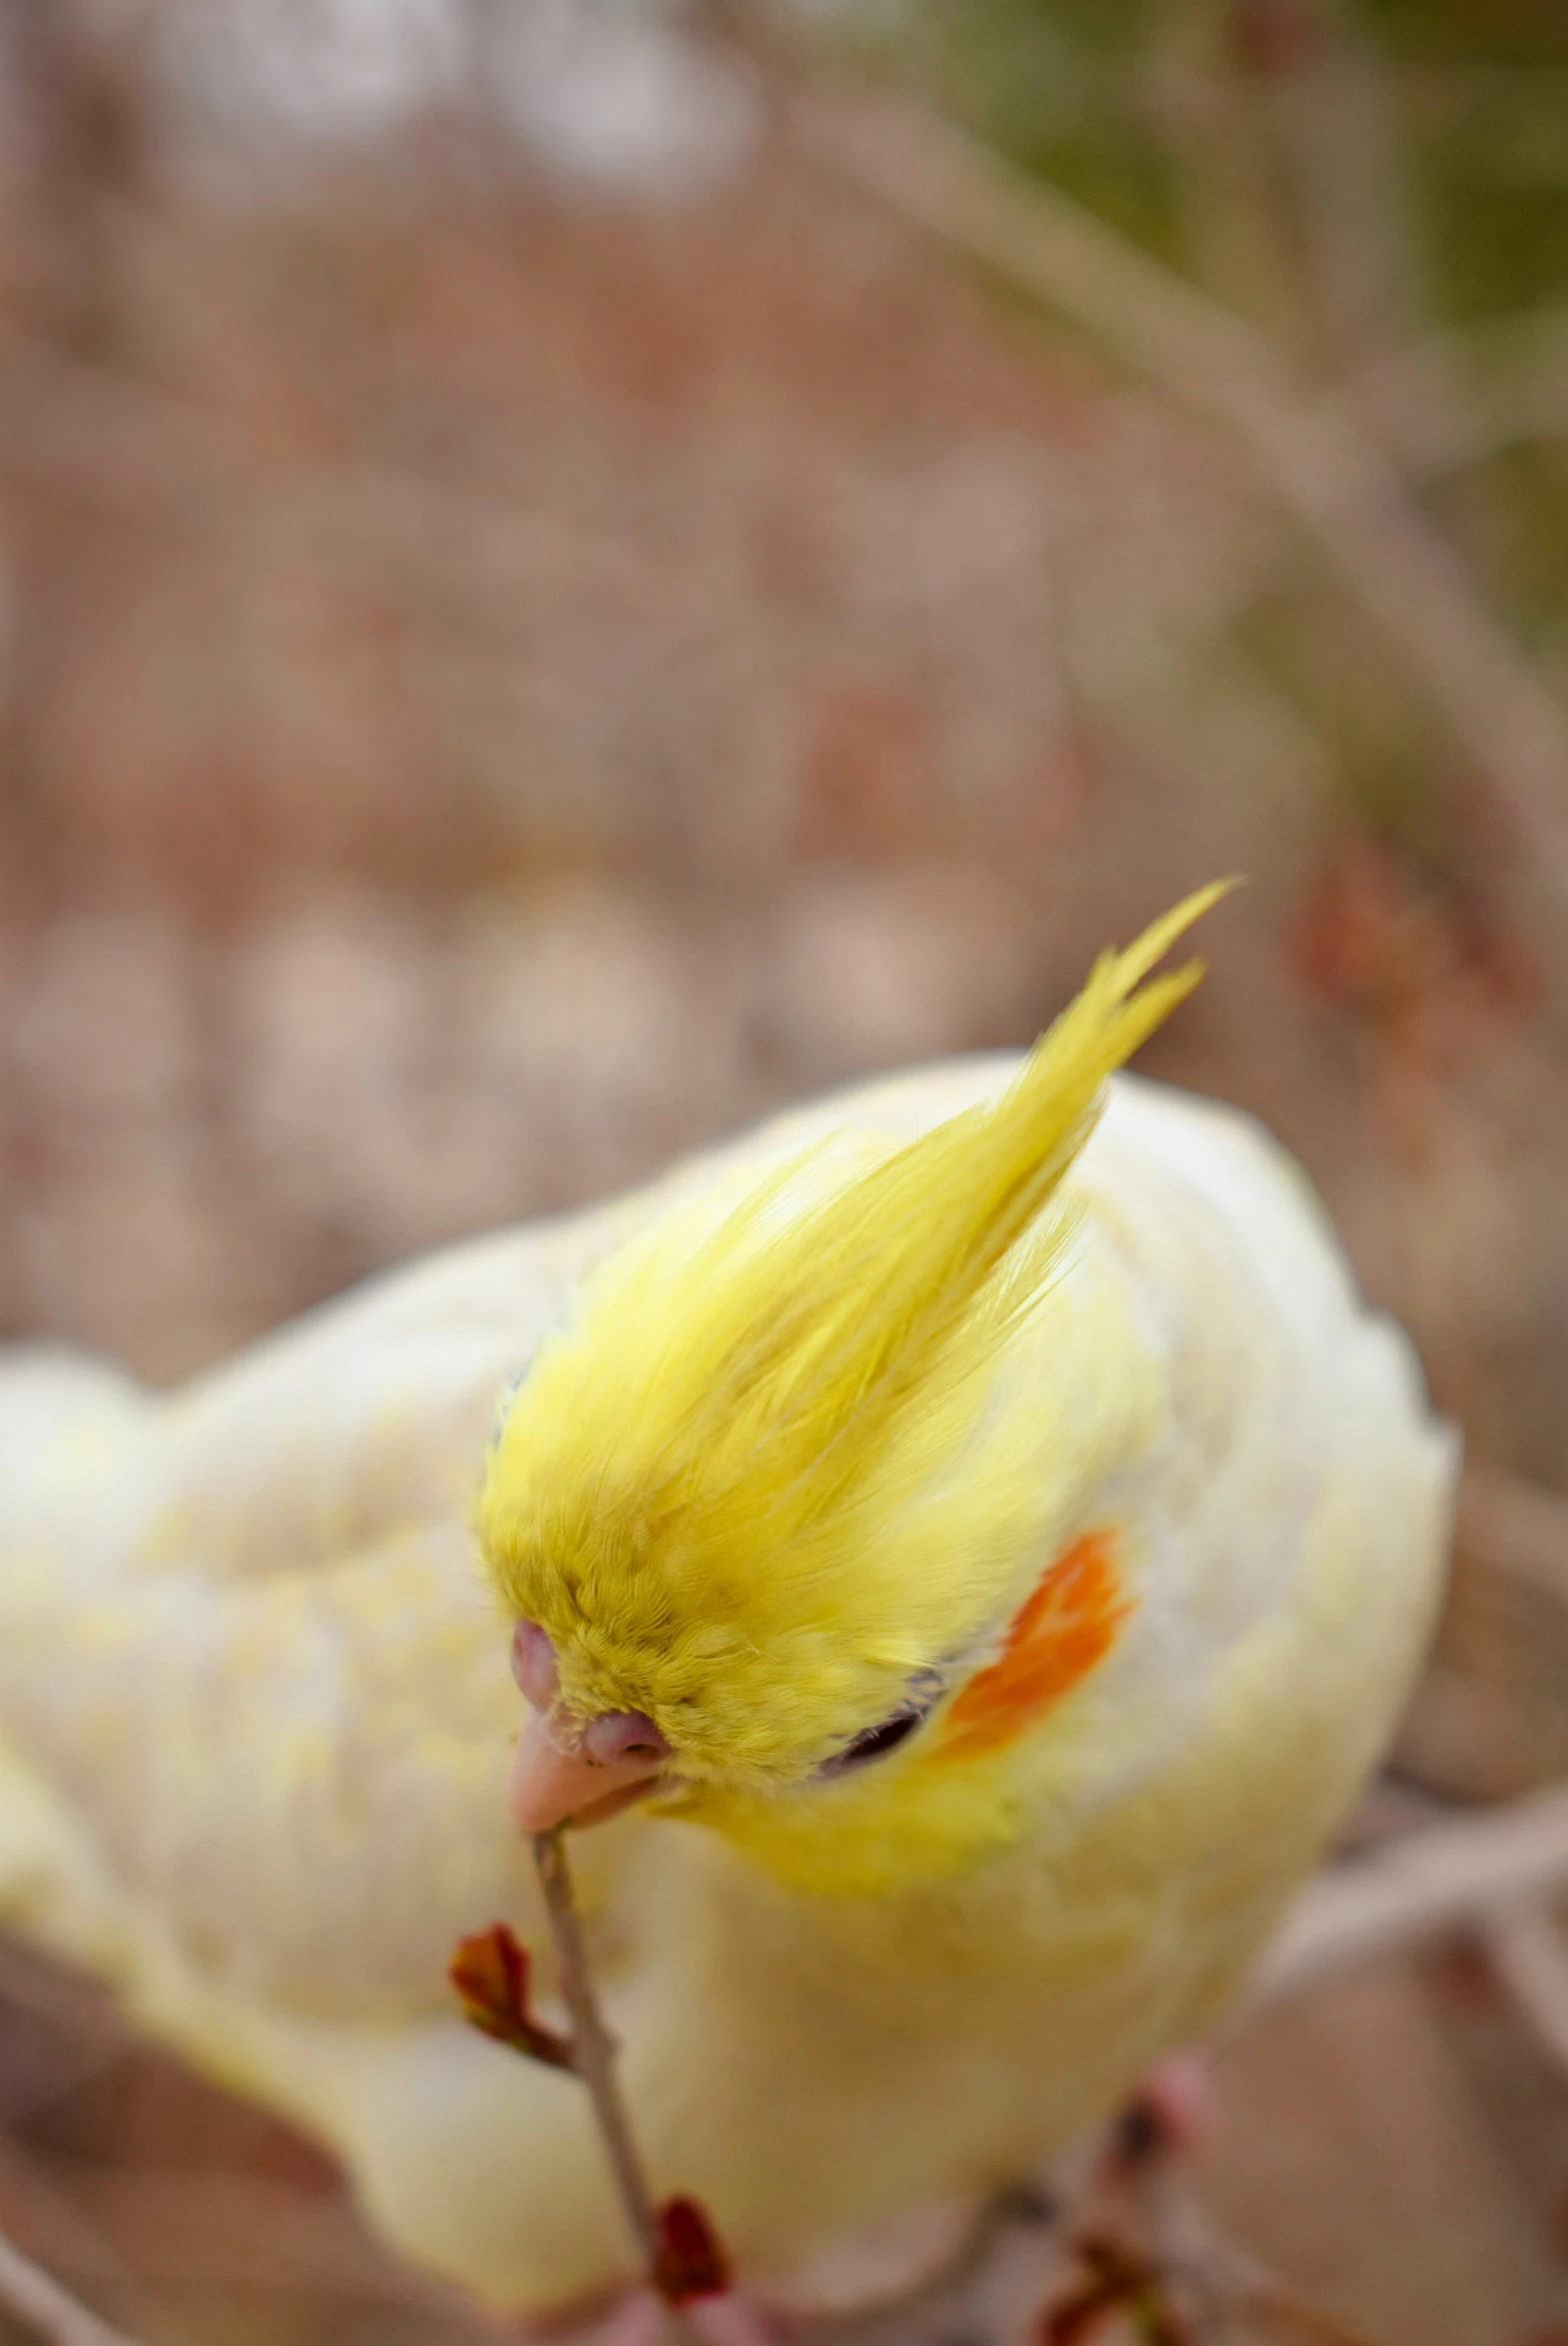 the bird is yellow with an orange patch in its beak